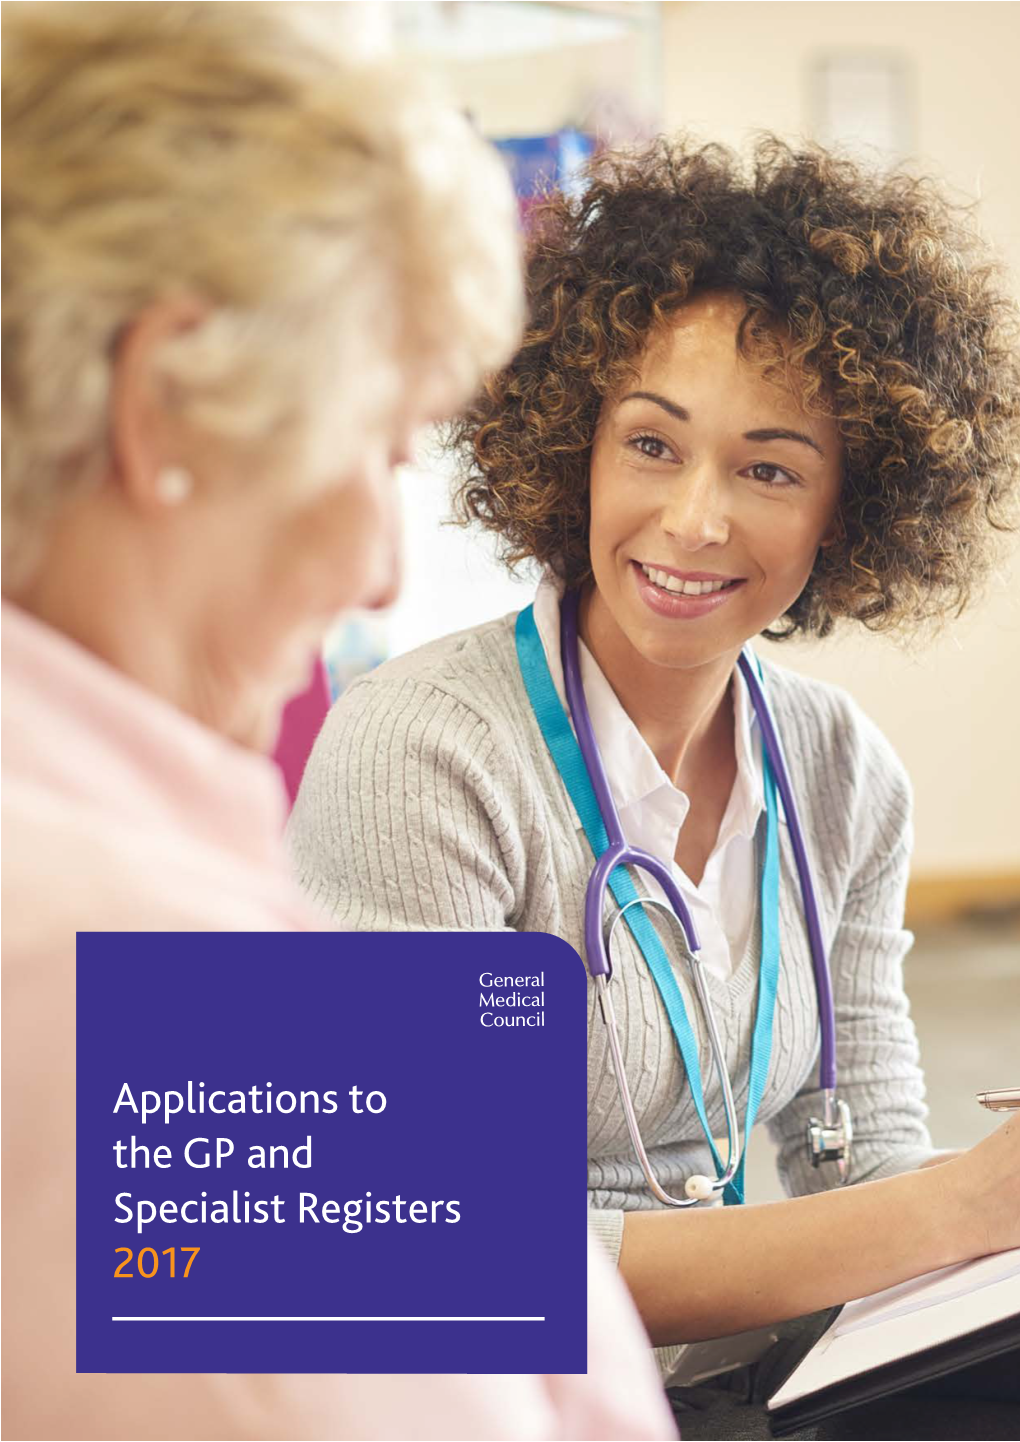 Applications to the GP and Specialist Registers 2017